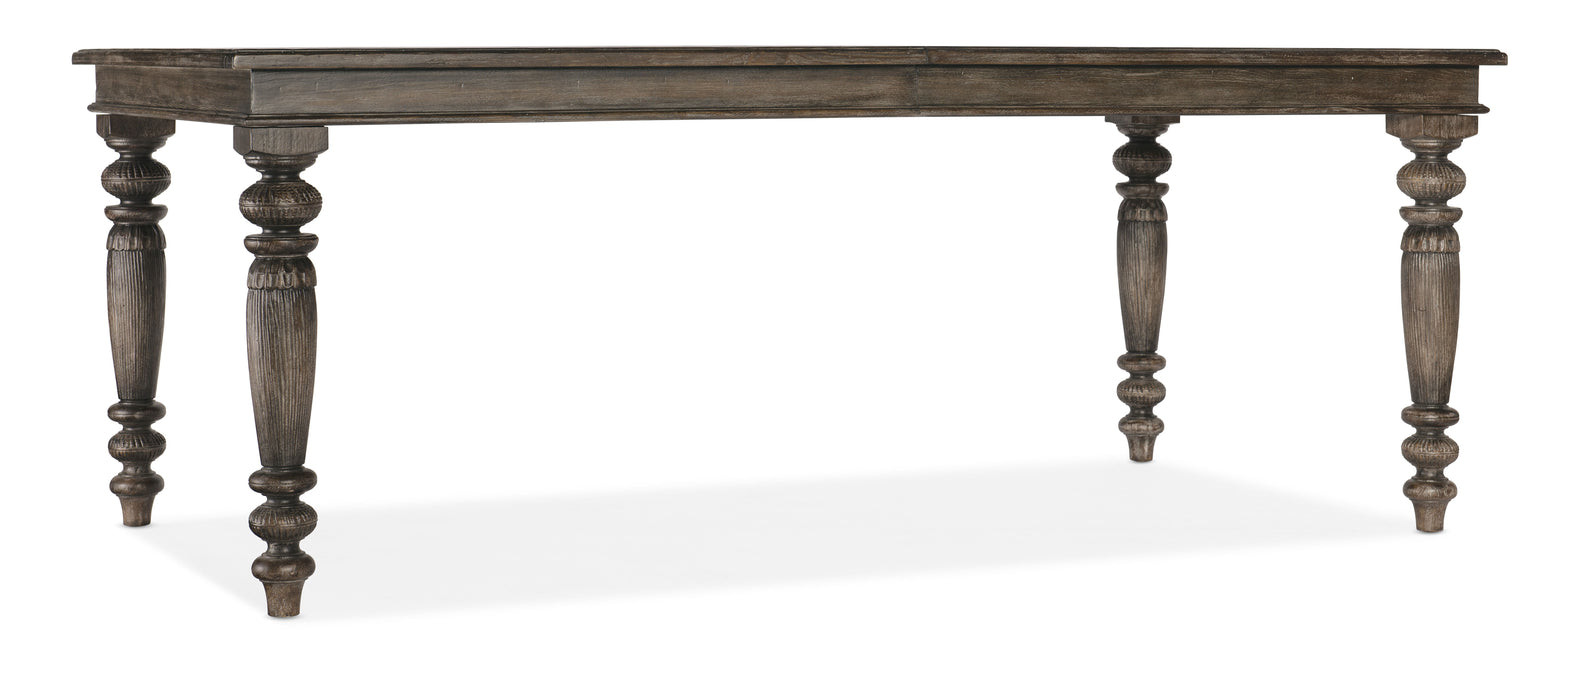 Traditions - Rectangle Dining Table With Two Leaves